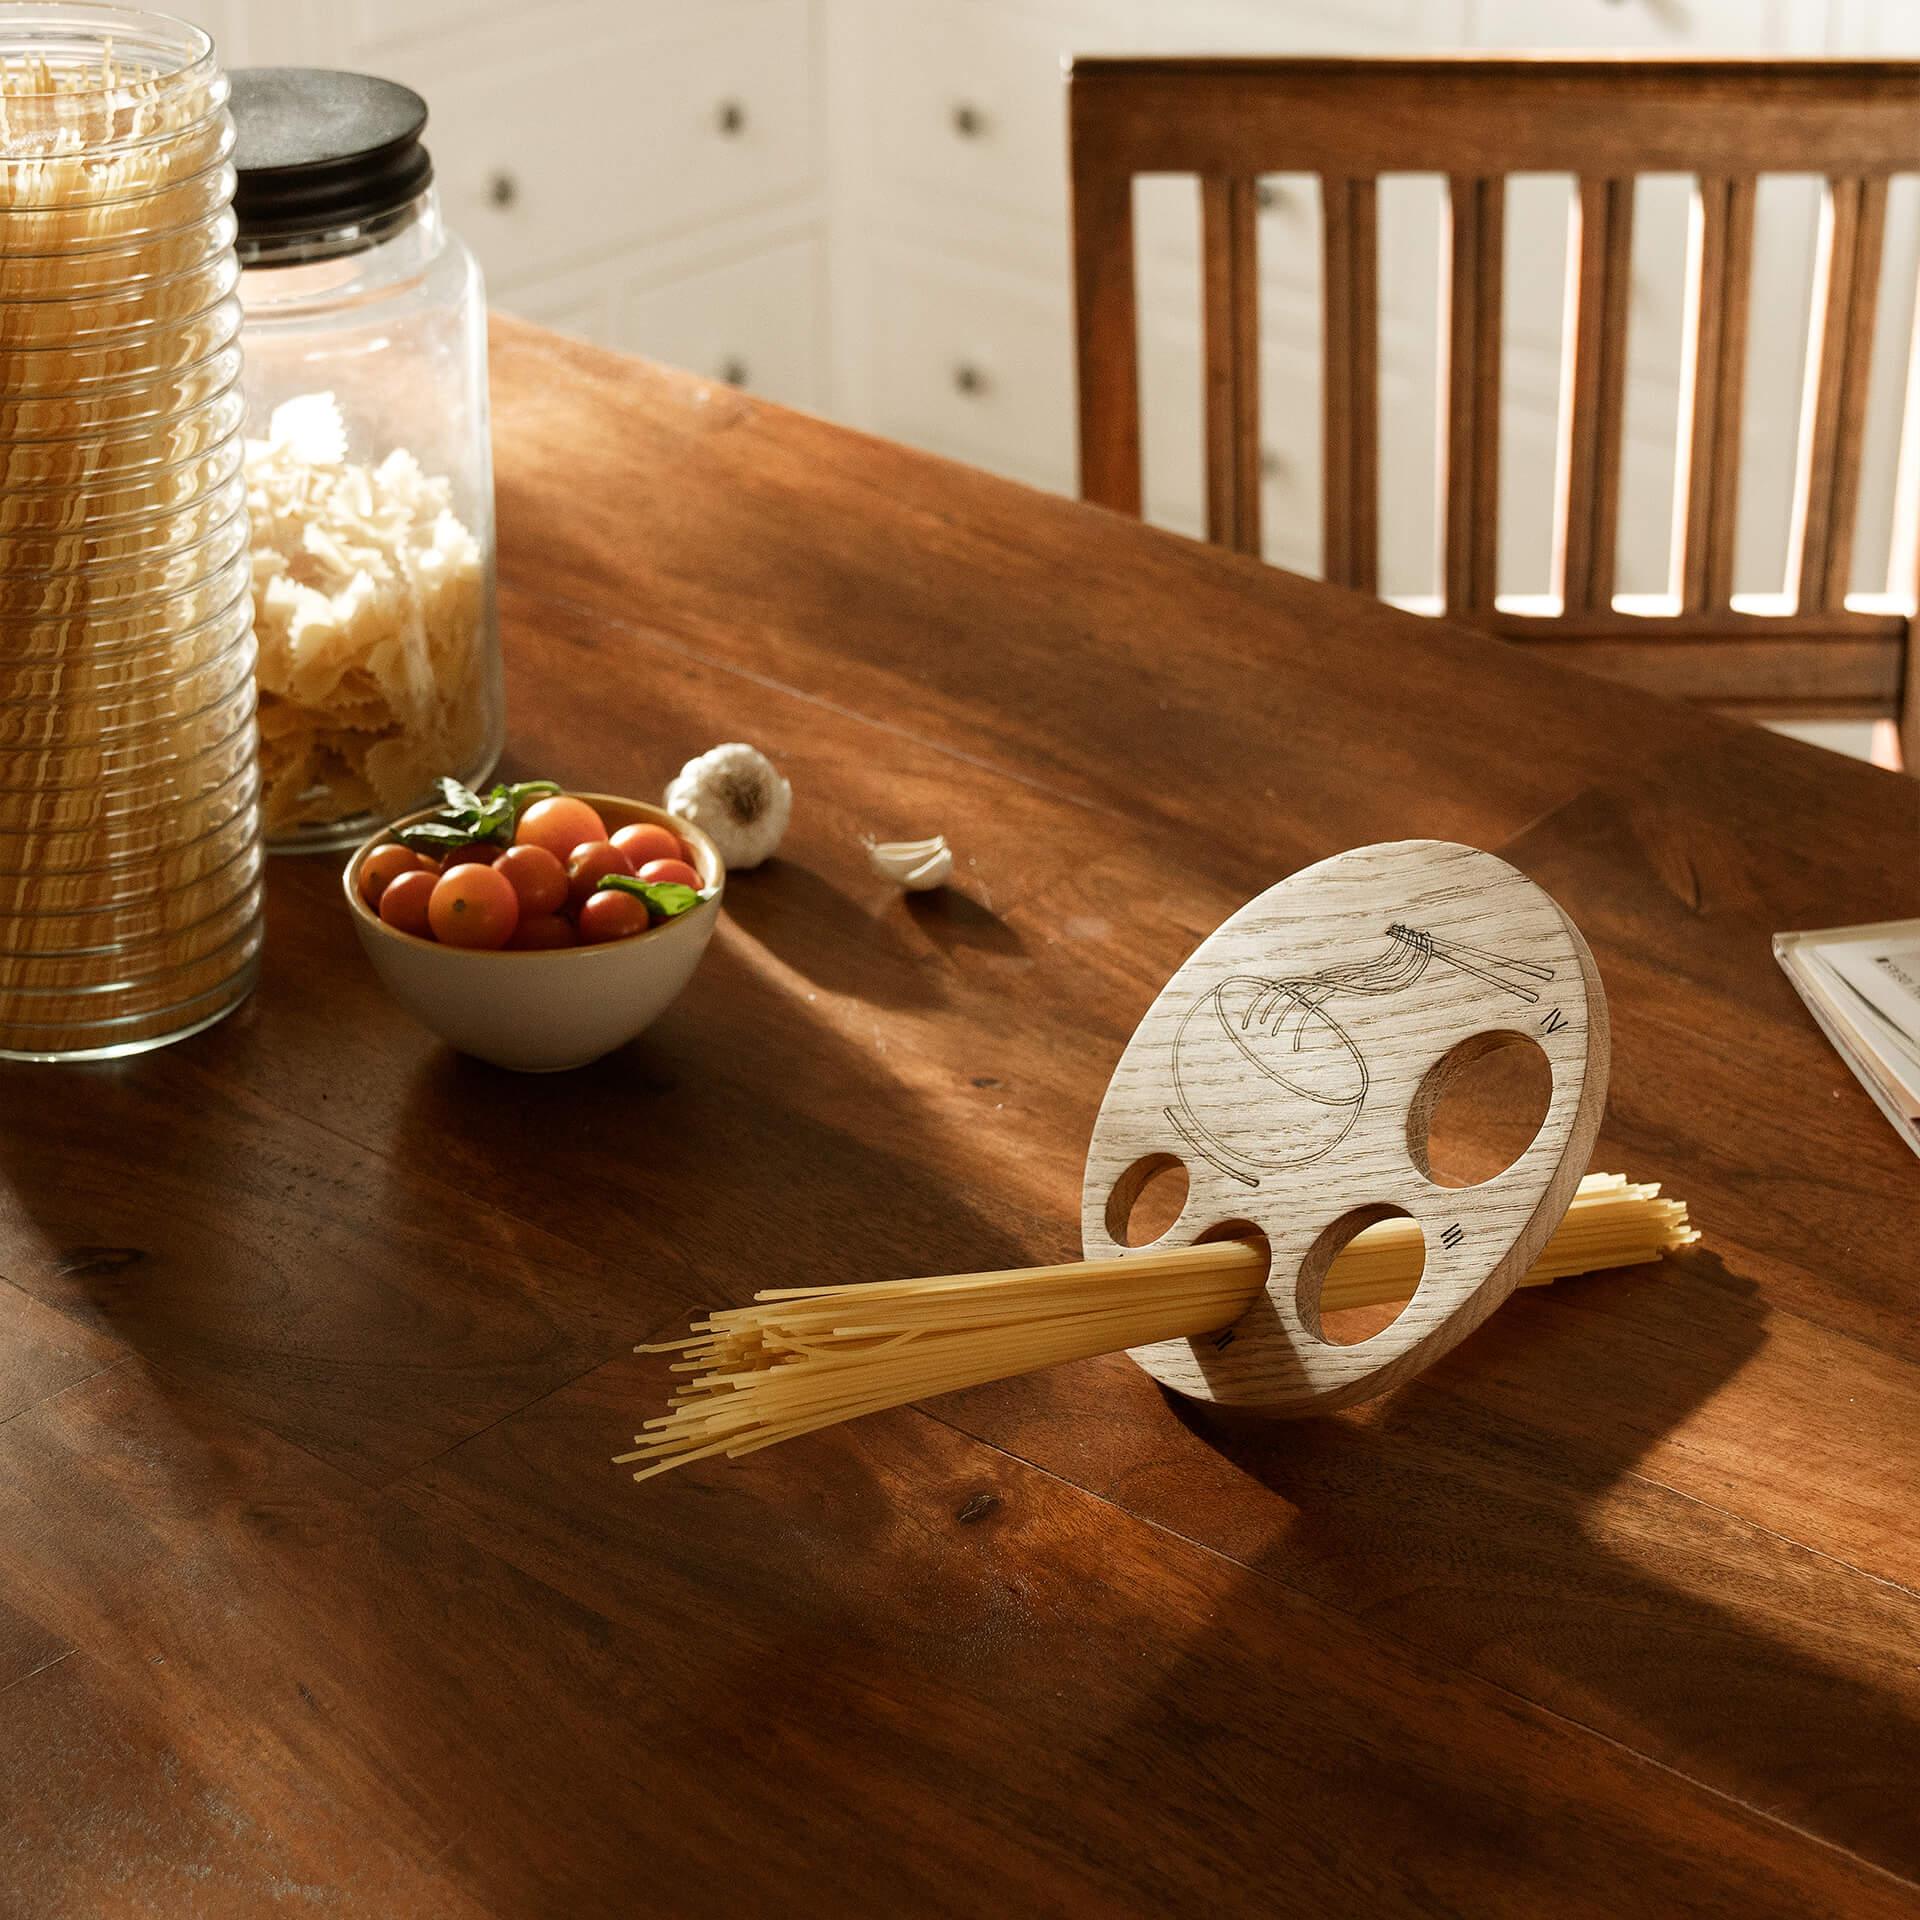 Round Oak Pasta Measure with 4 Portion